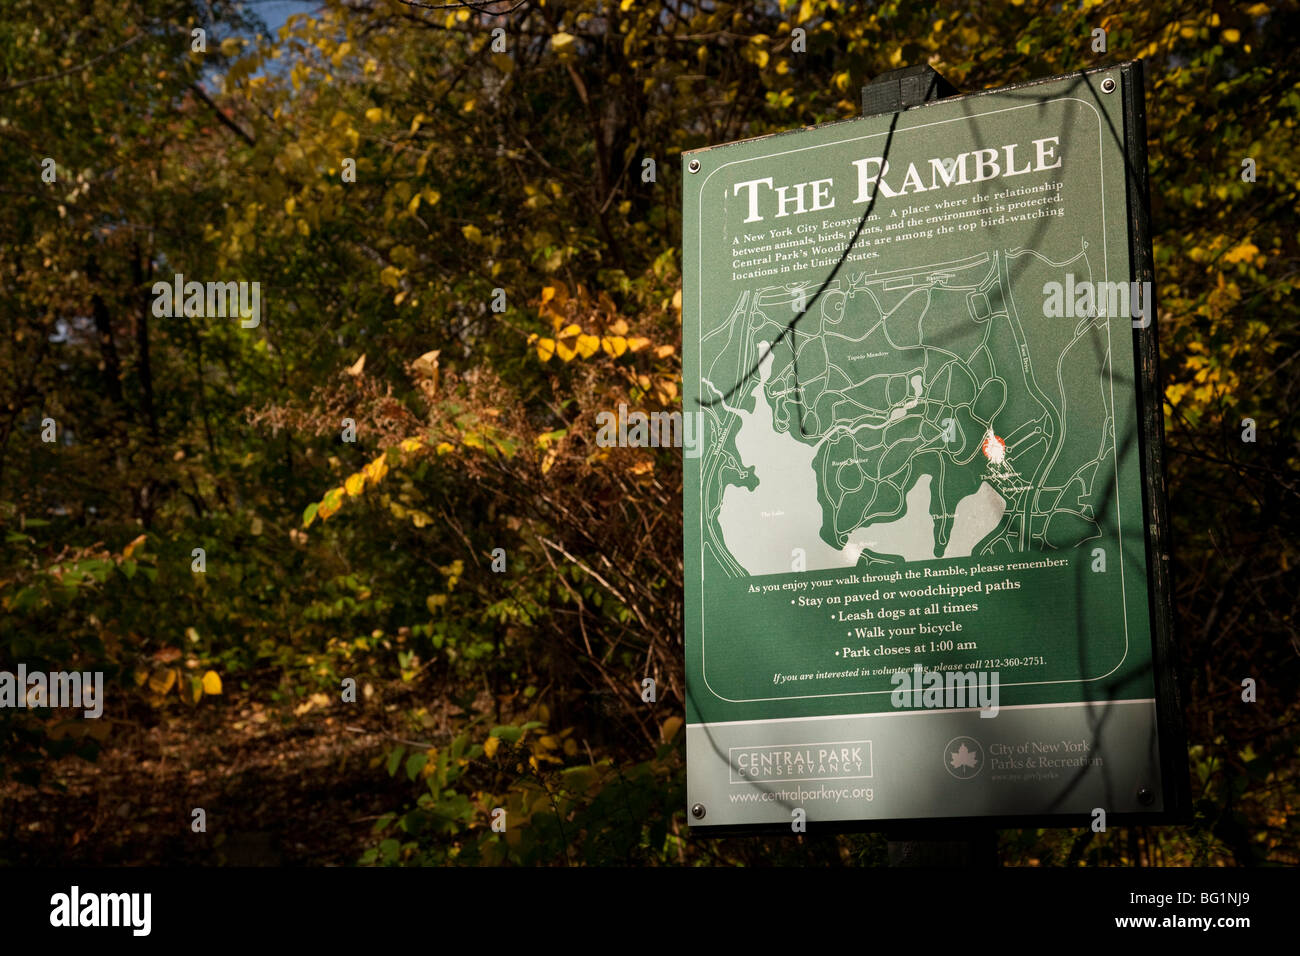 'The Ramble' Sign, Central Park, NYC Stock Photo